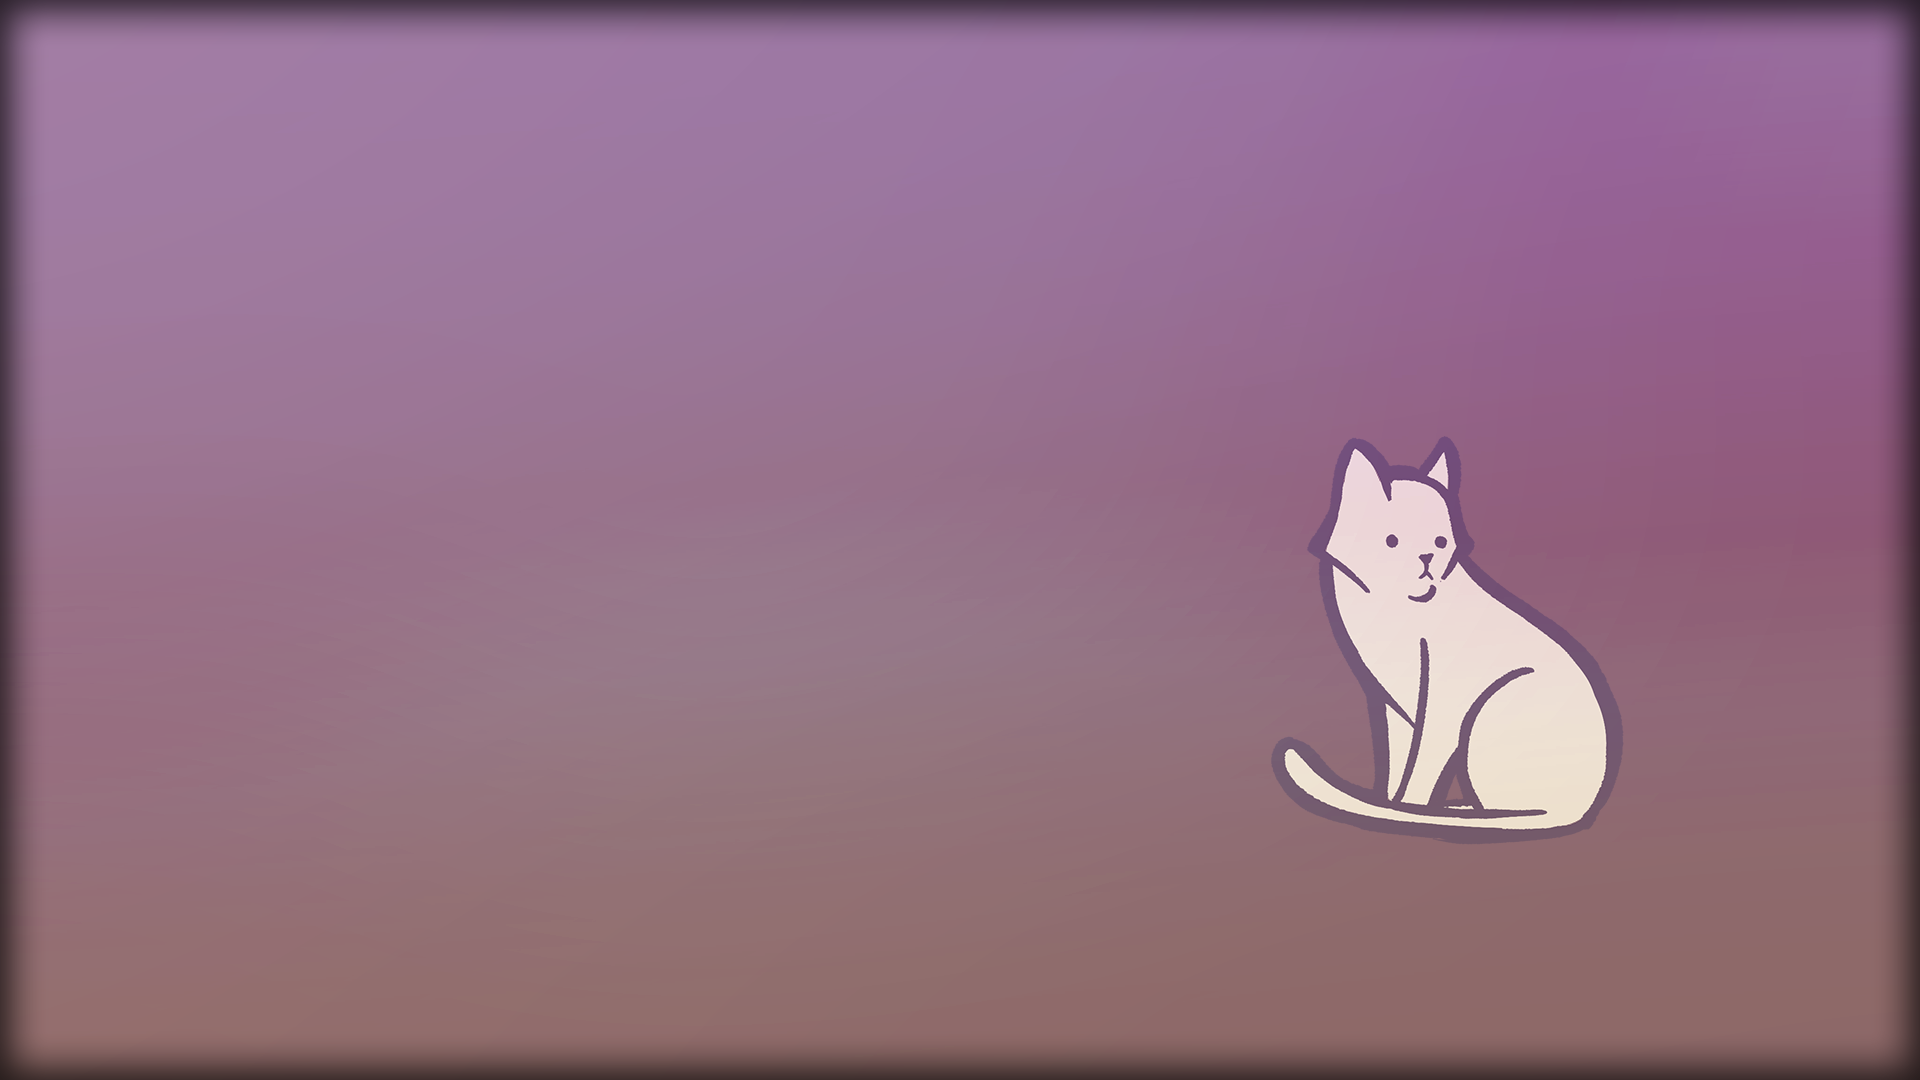 Icon for Found 300 cats